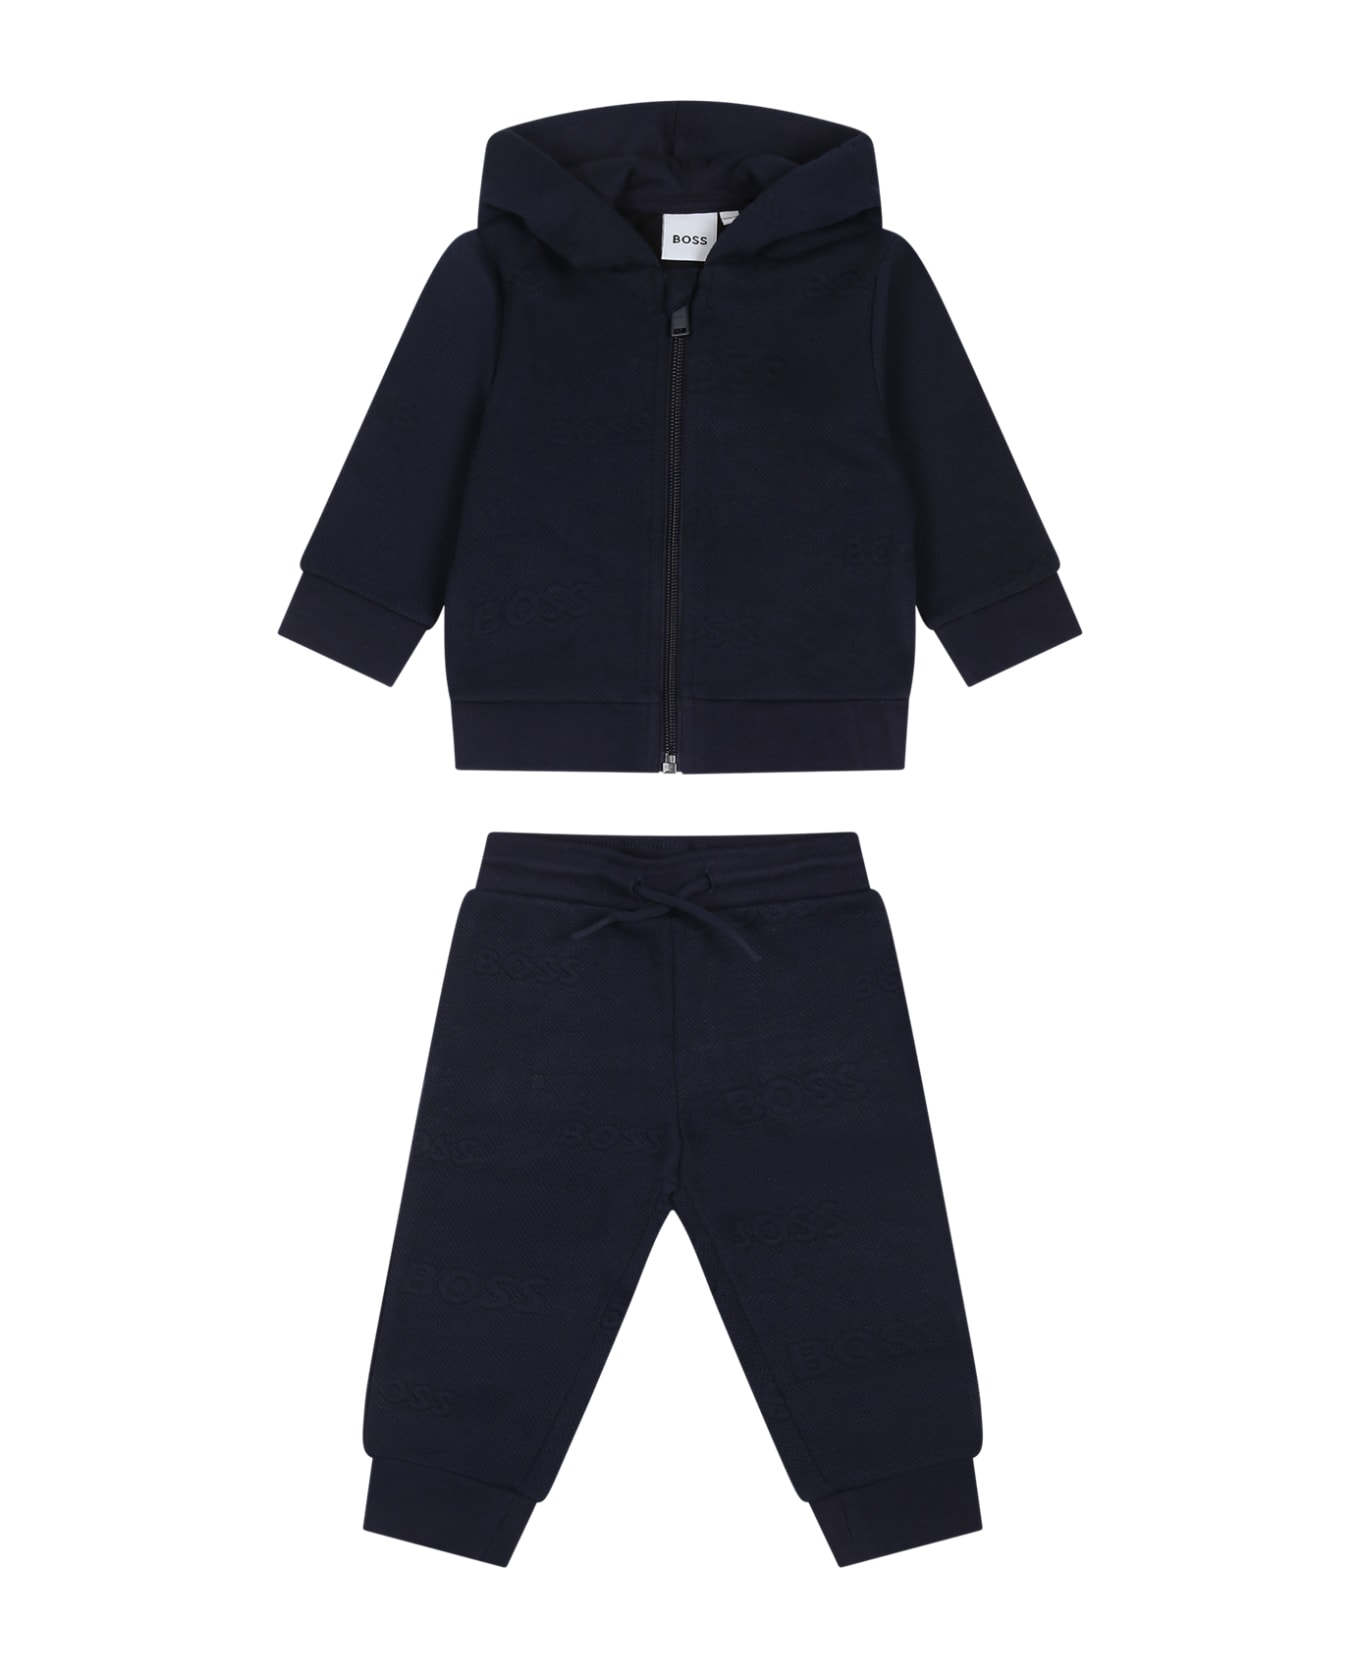 Hugo Boss Green Suit For Baby Boy With Logo - Blue ボトムス